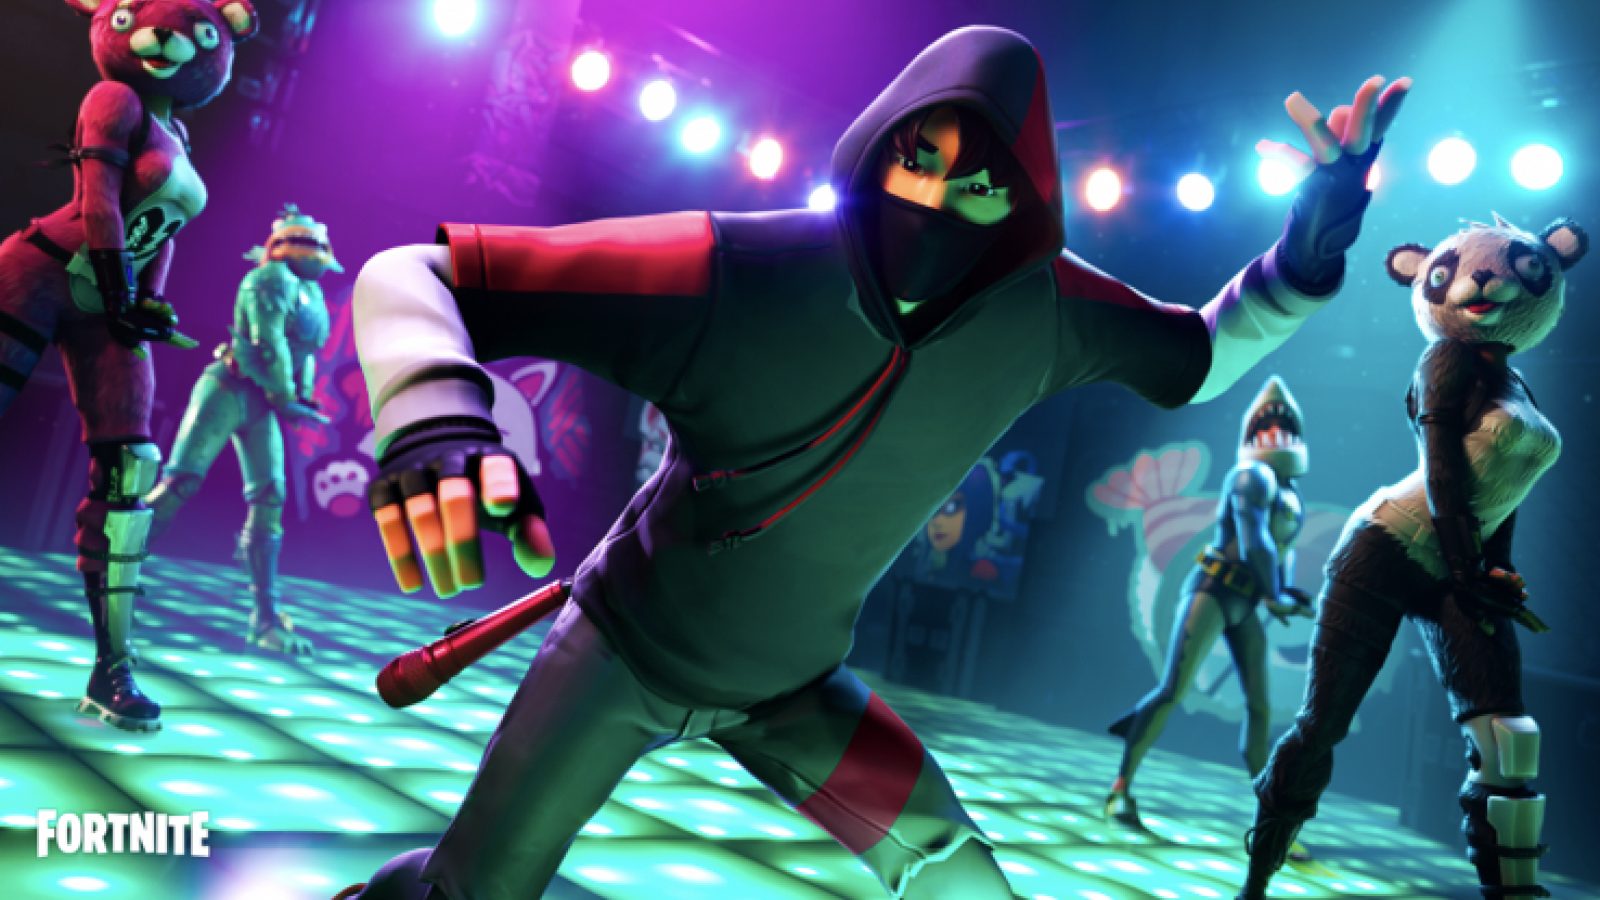 Will Fortnite S New Ikonik Skin Be Available To All Samsung Users